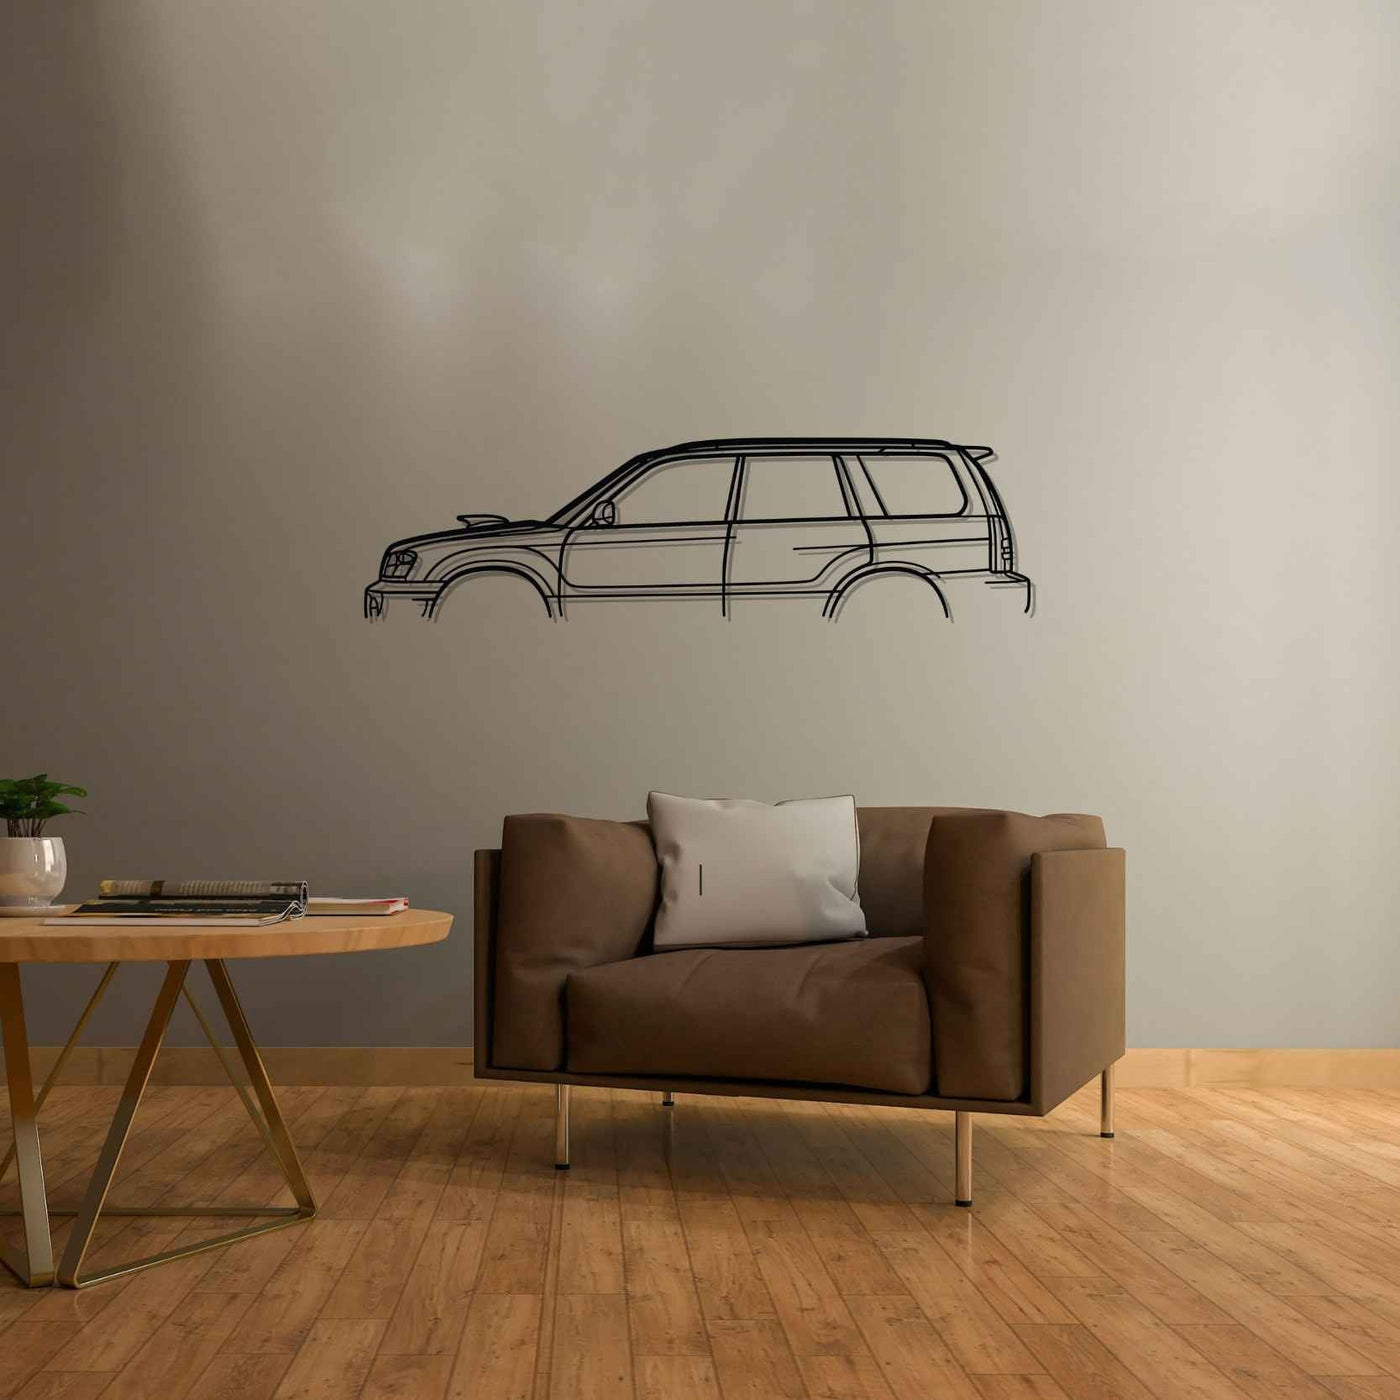 Forester XT 2004 Classic Silhouette Metal Wall Art